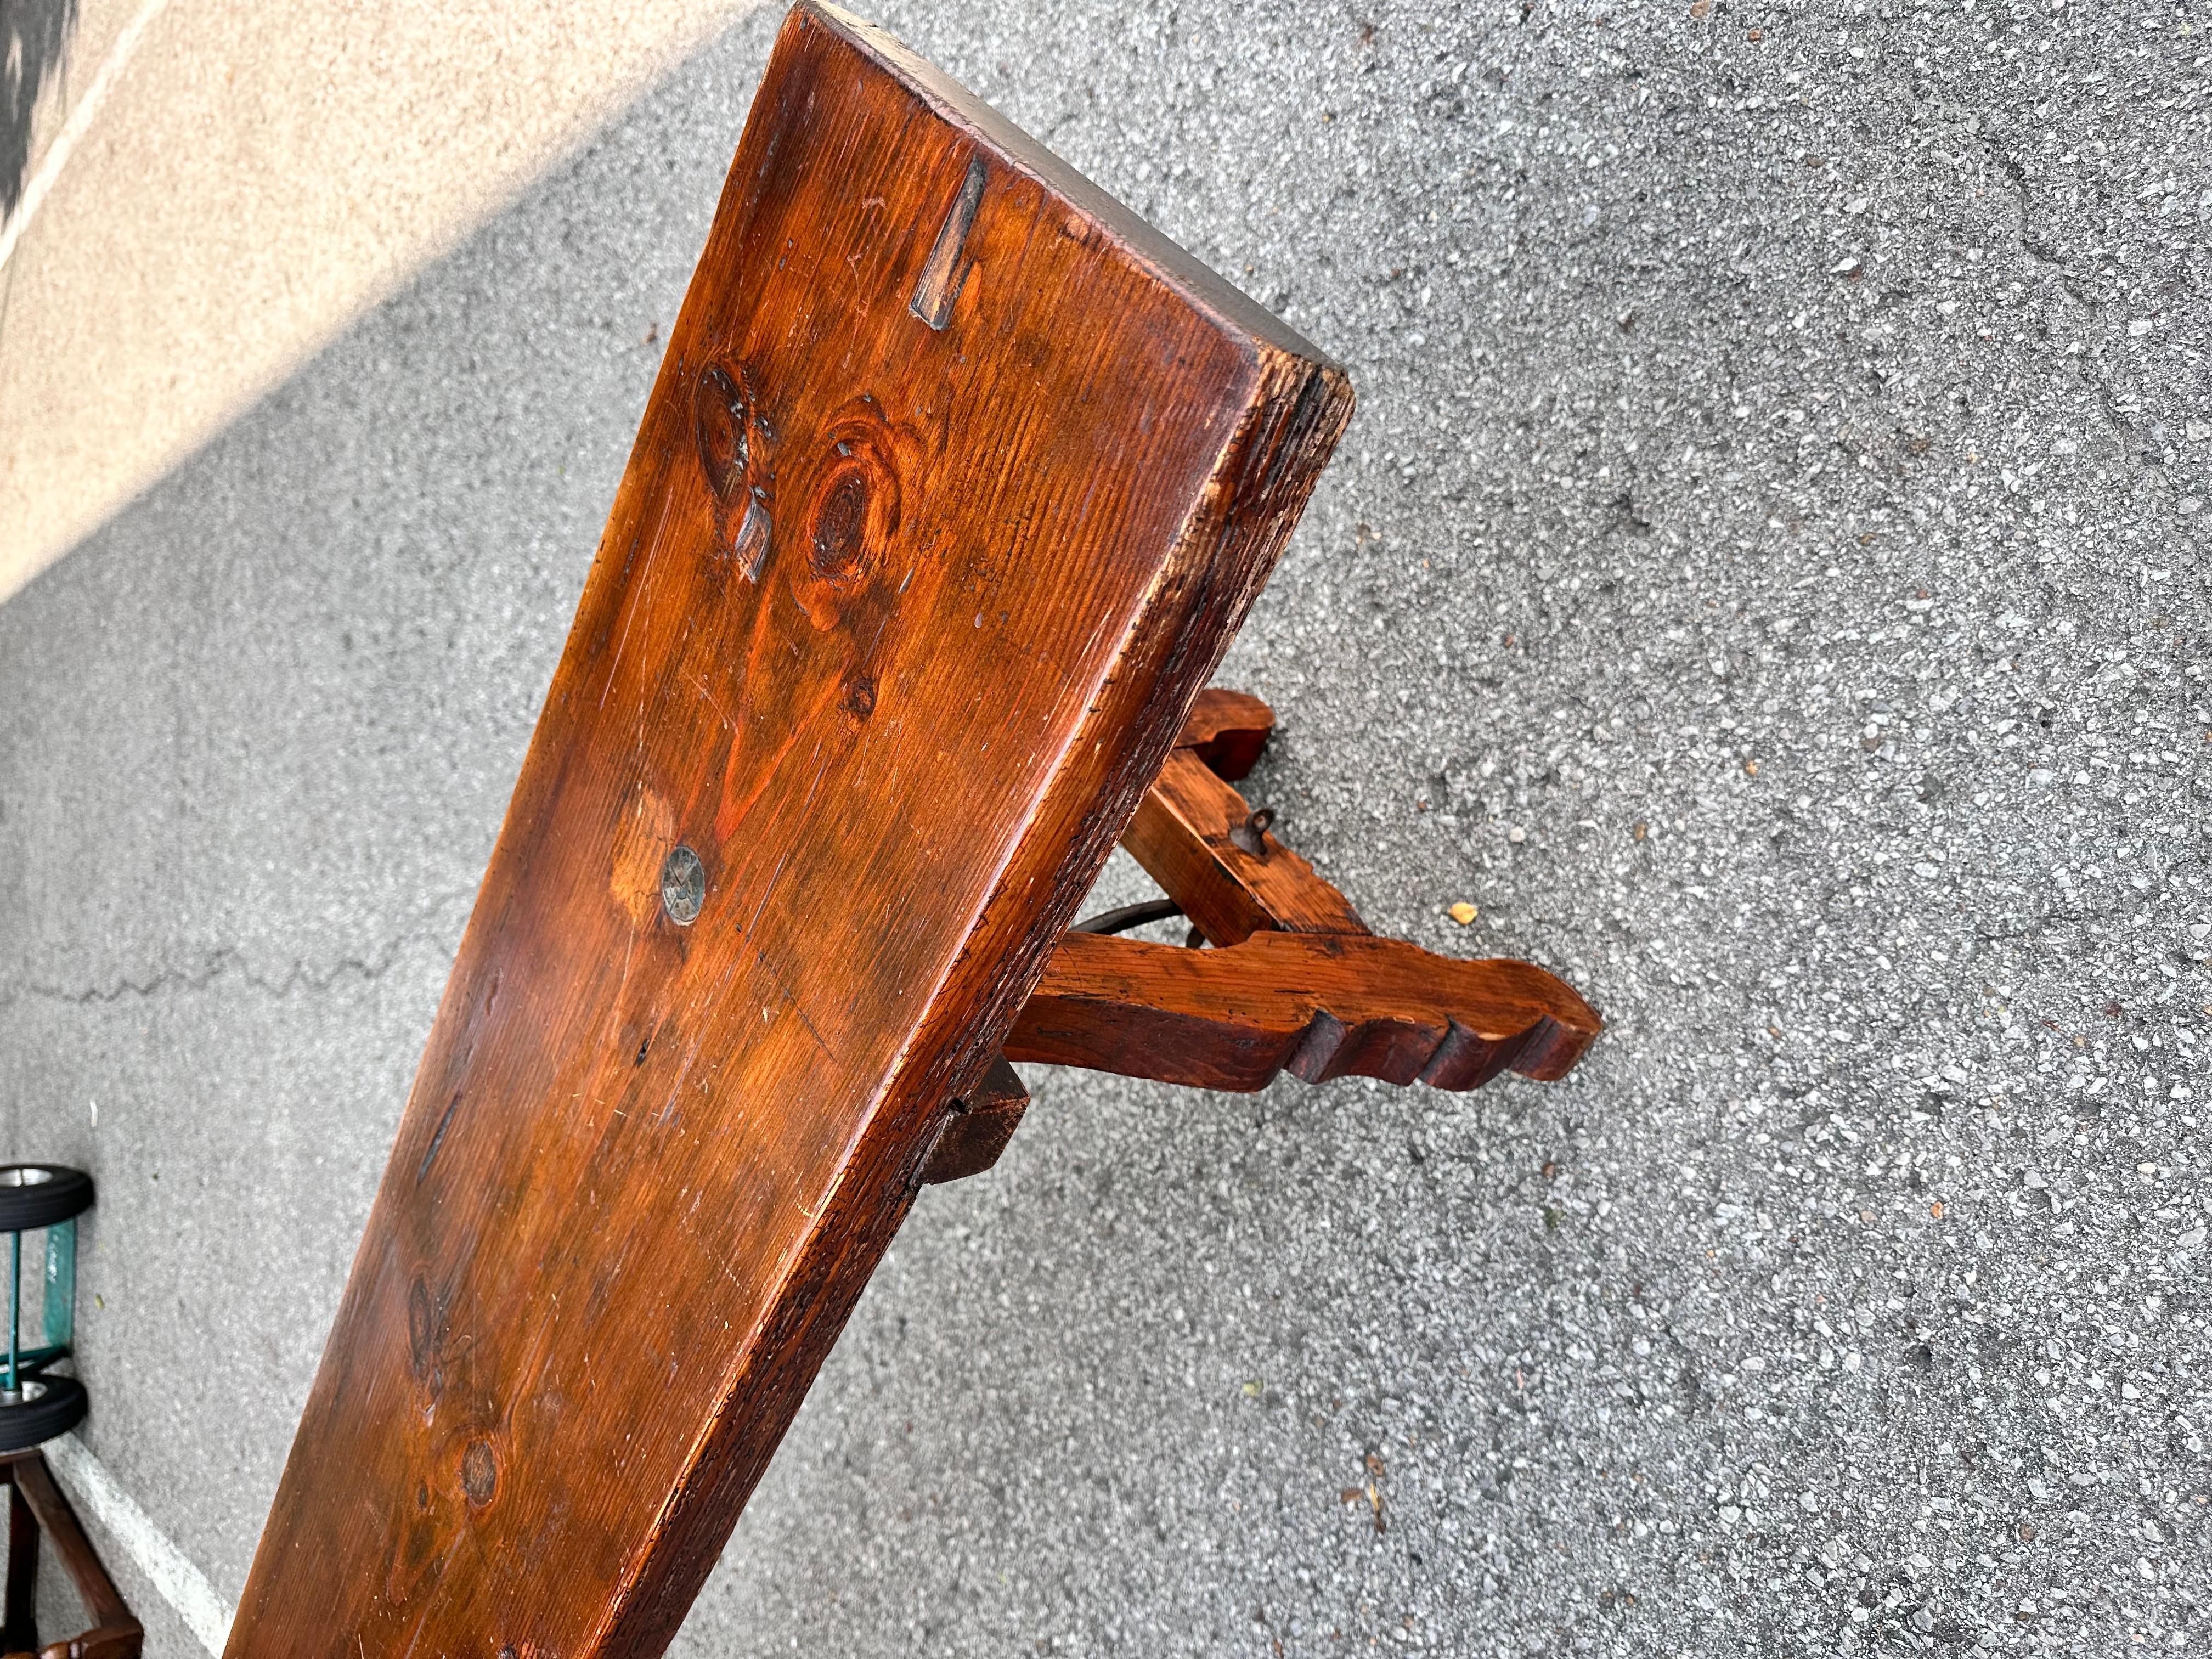 This is a stunning antique bench! This piece dates to 19th century Spain, and the patina and character on this piece are stunning! Beautiful tone and the antique iron brace underneath adds a gorgeous accent to the rich color of the wood. This would